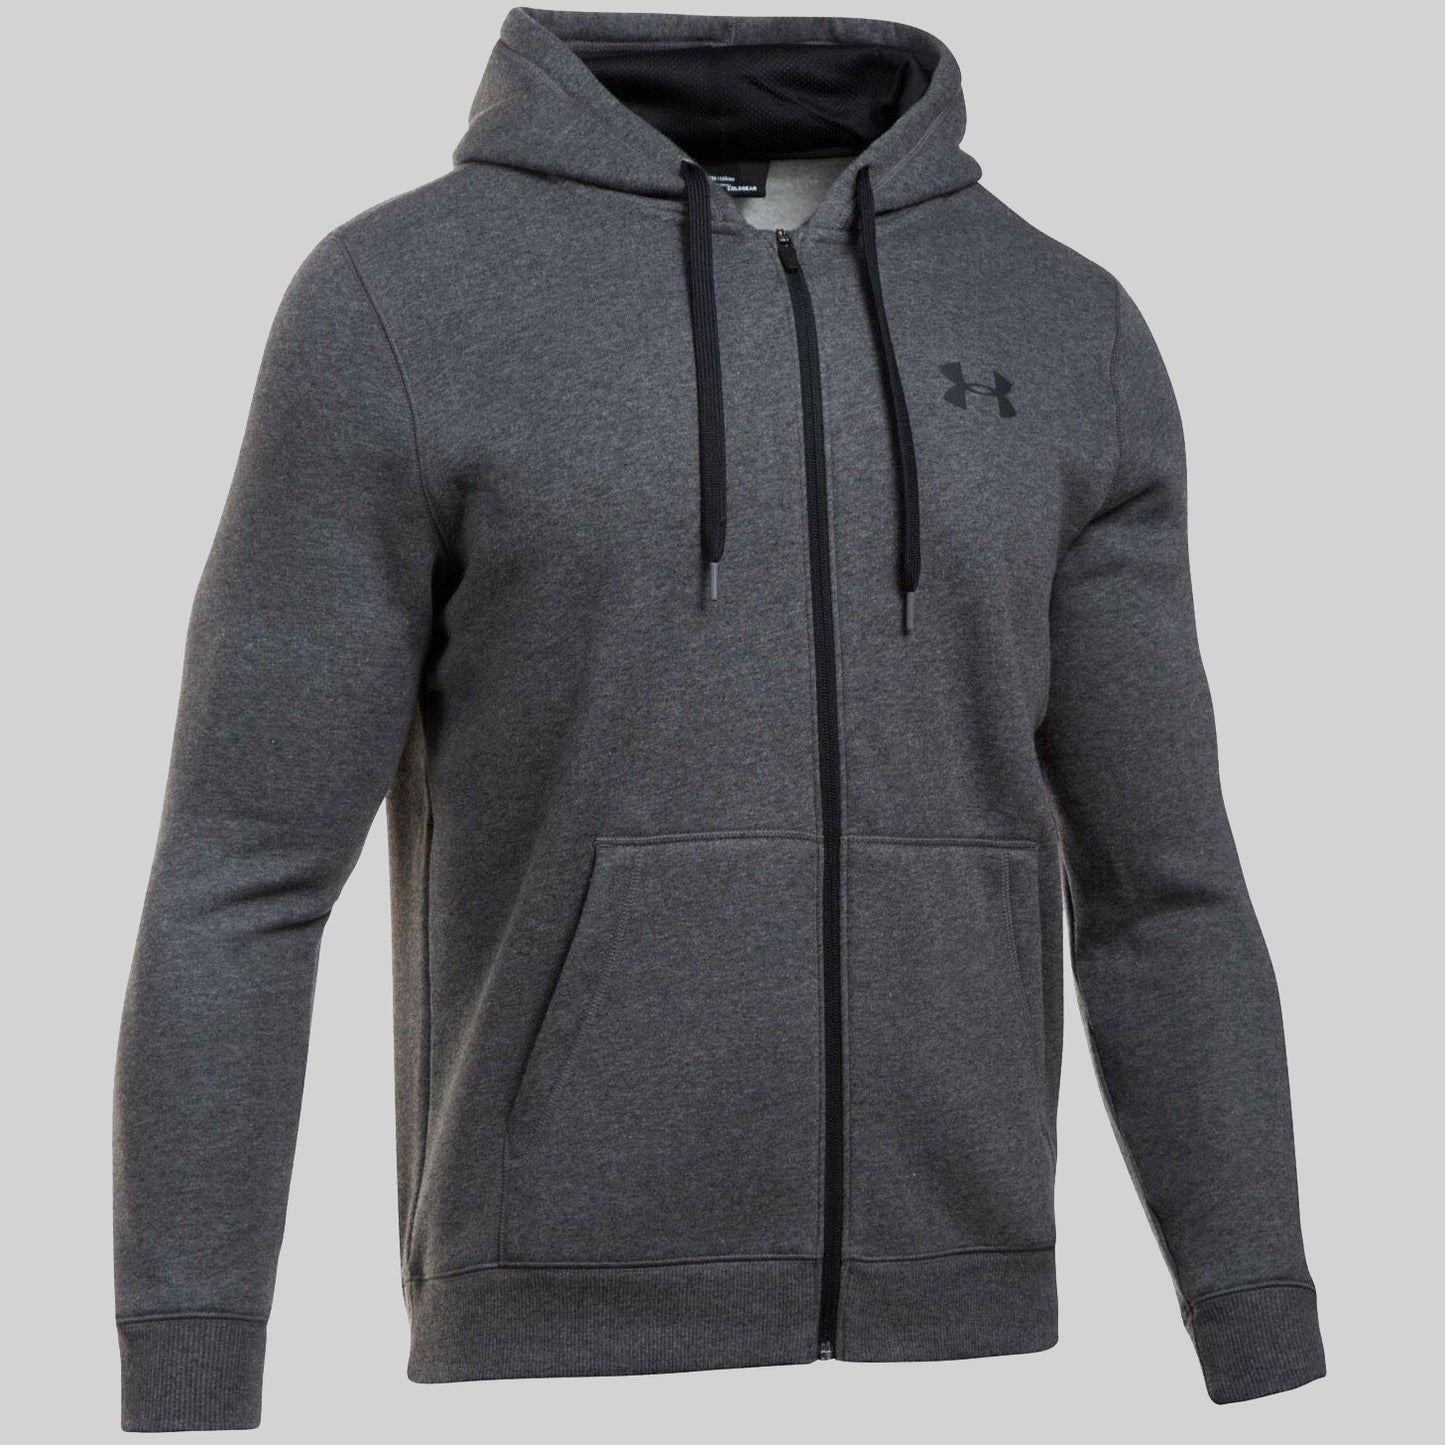 Under Armour Classic Grey Hoodie